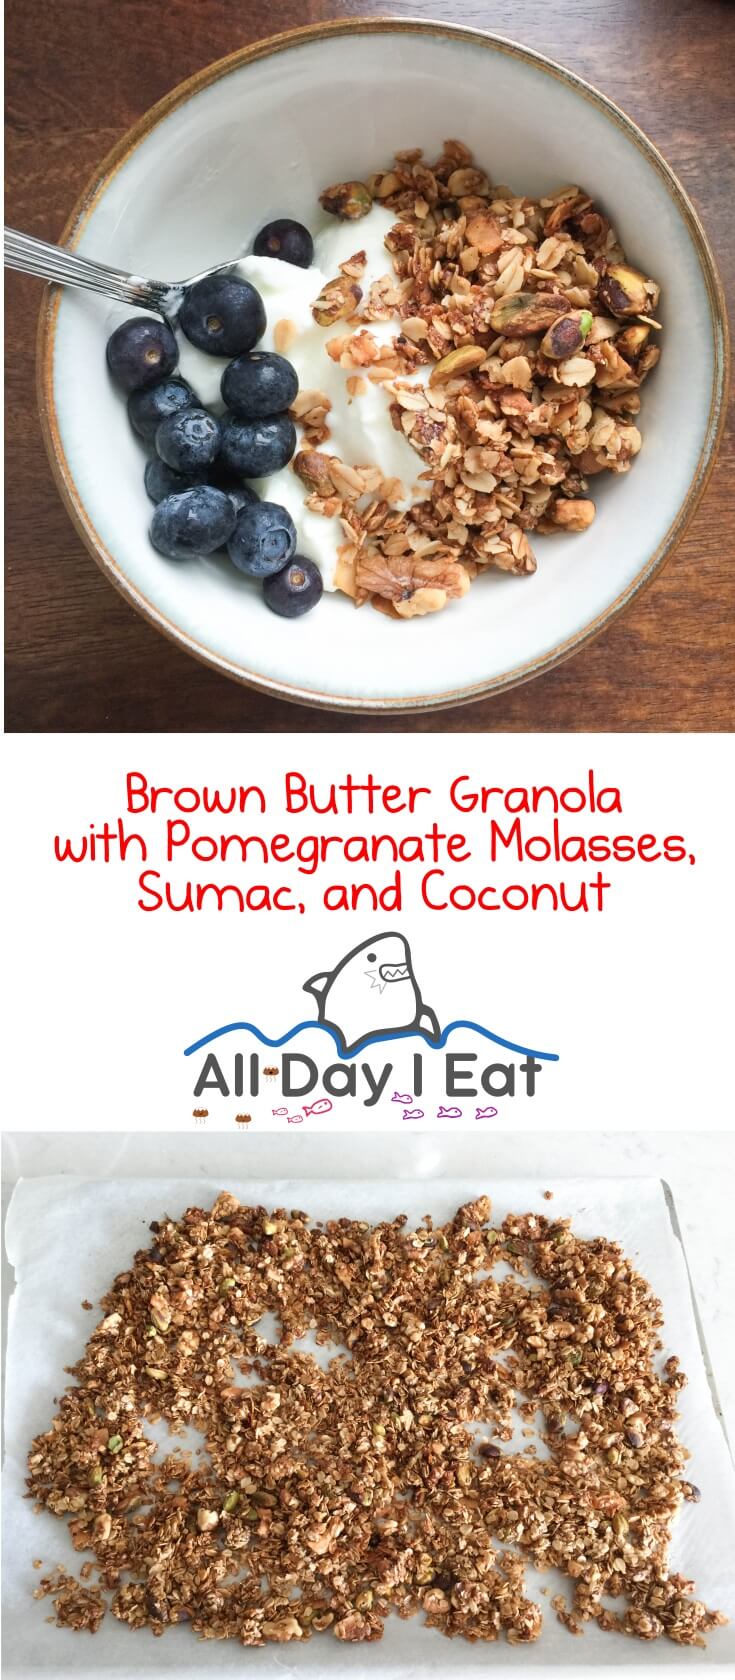 Brown Butter Granola with Pomegranate Molasses, Sumac, and Coconut. A declious and indulgent granola that is sure to impress! | www.alldayieat.com